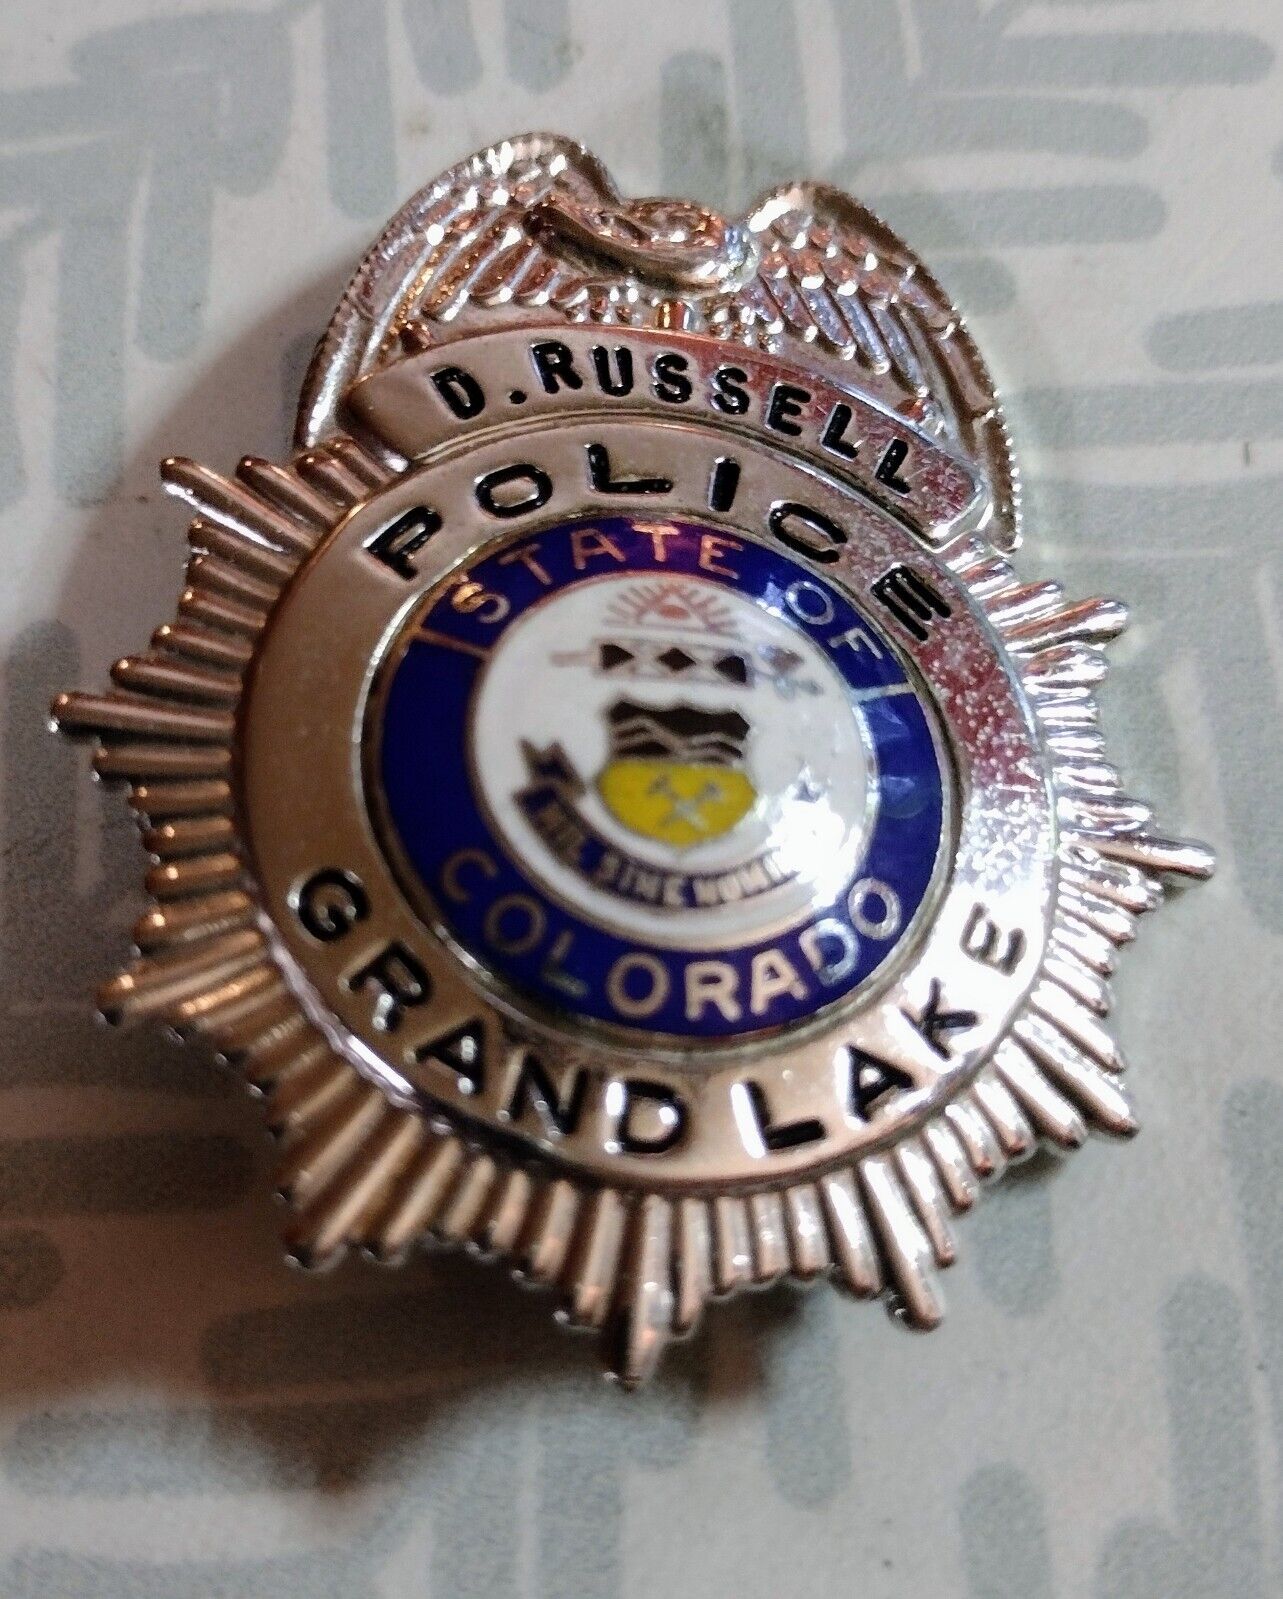 GRAND LAKE COLORADO POLICE BADGE NAMED D. RUSSELL